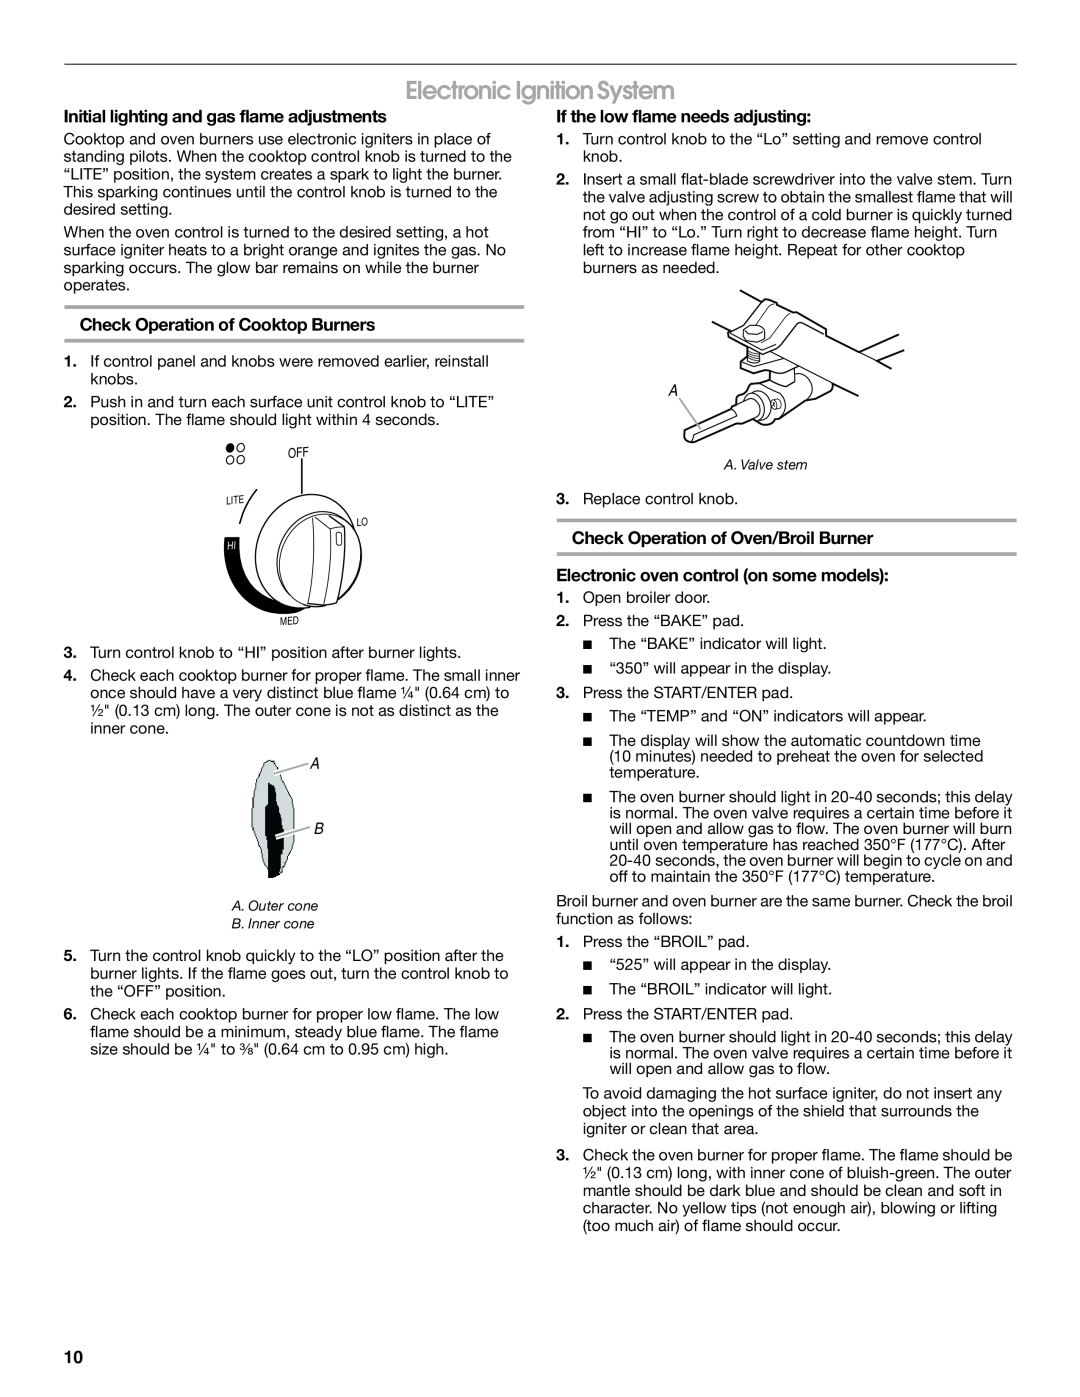 Whirlpool W10200946A installation instructions Electronic Ignition System, Initial lighting and gas flame adjustments 